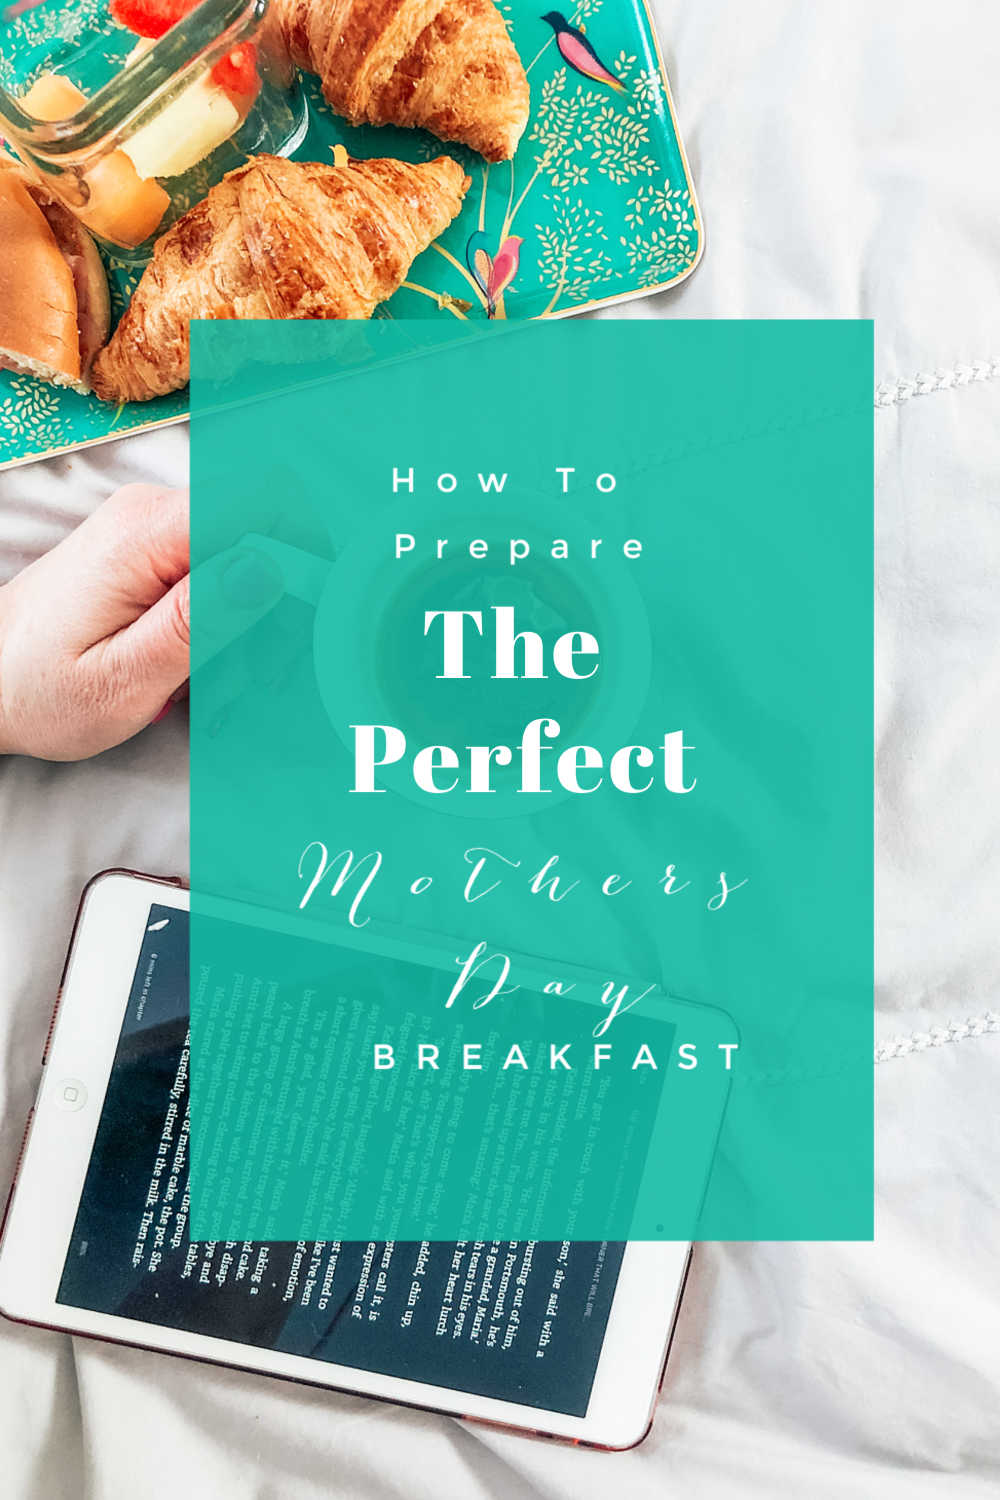 Breakfast in bed ideas for mothers day 